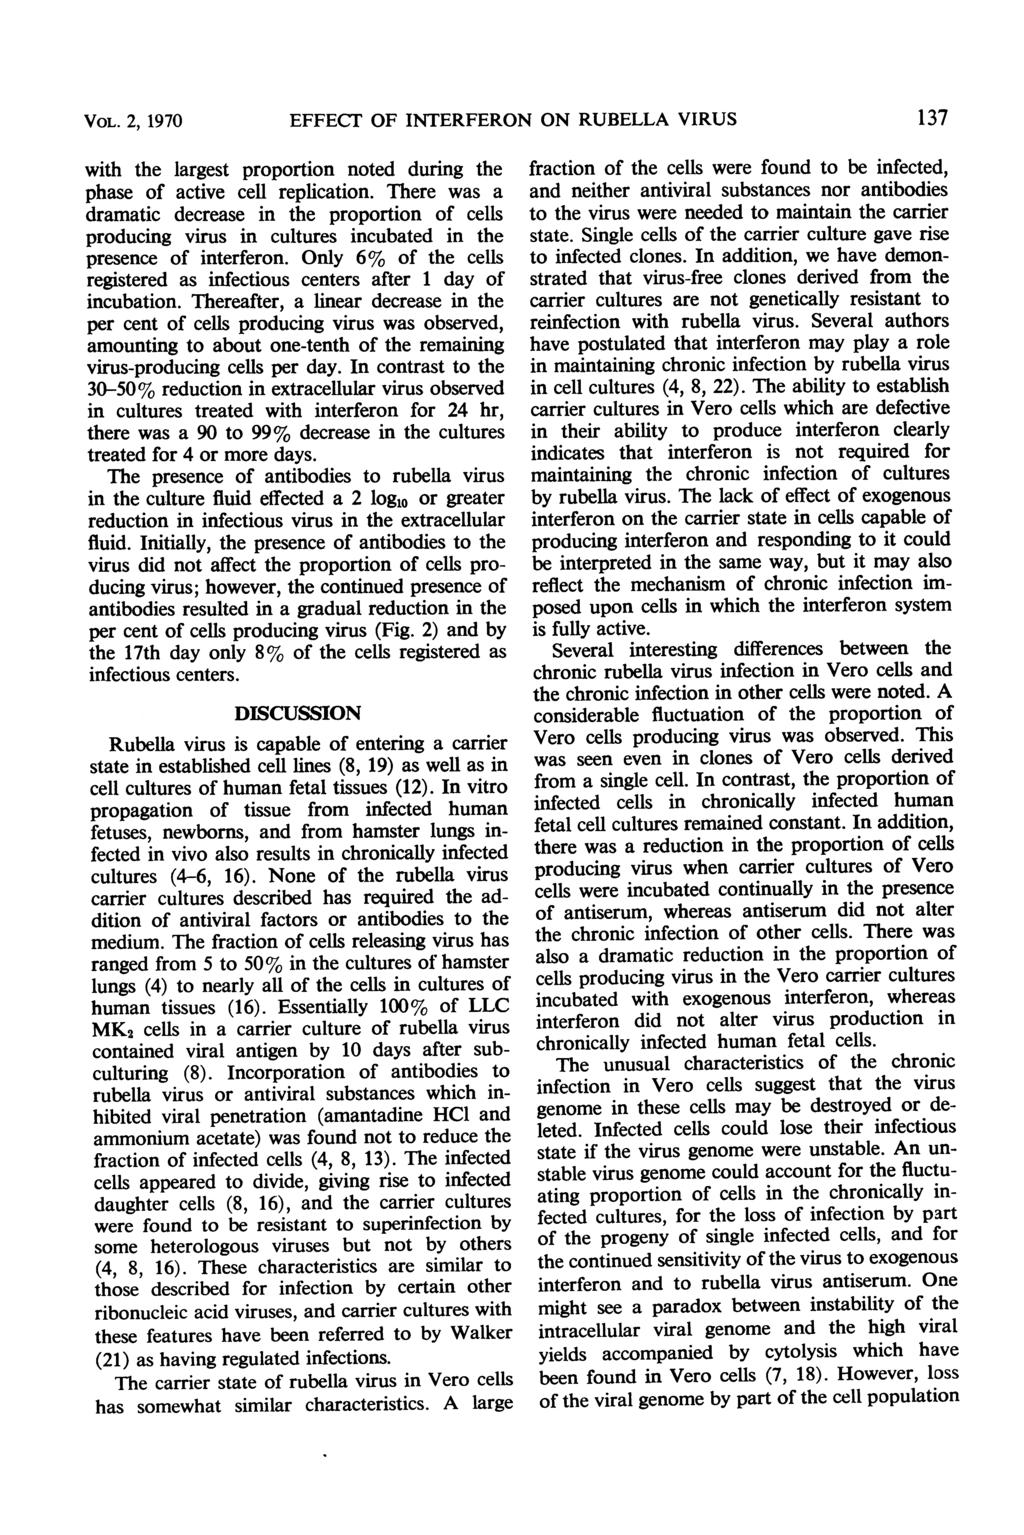 VOL. 2, 1970 EFFECT OF IERFERON ON RUBELLA VIRUS with the largest proportion noted during the phase of active cell replication.